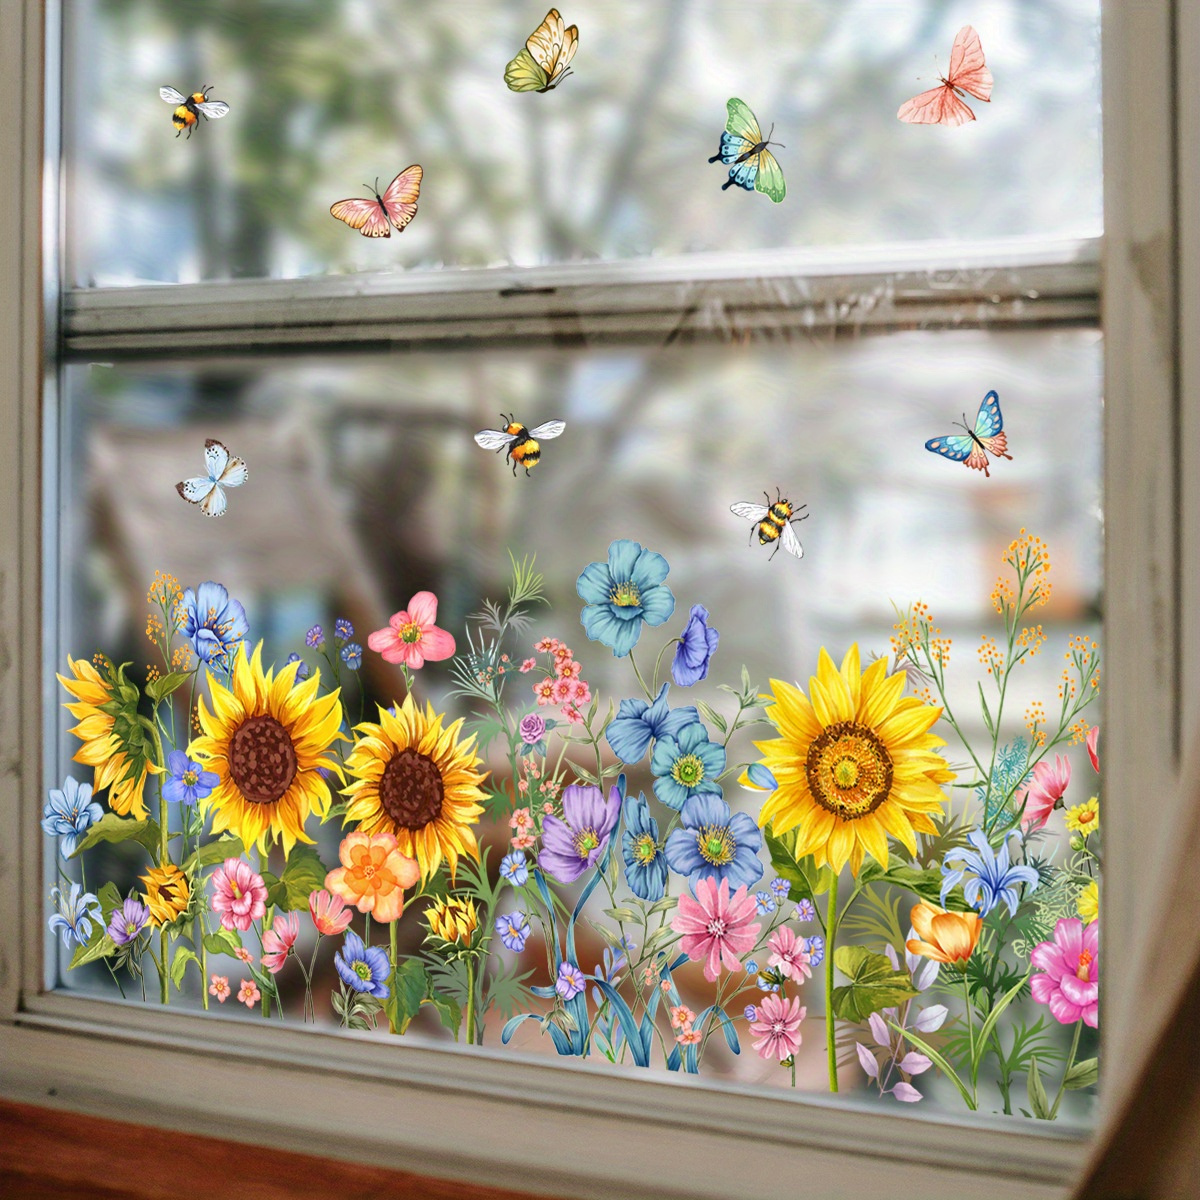 

Sunflower & Butterfly Wall Decal - 1pc, Easy Apply Window Glass Sticker For Home Decor